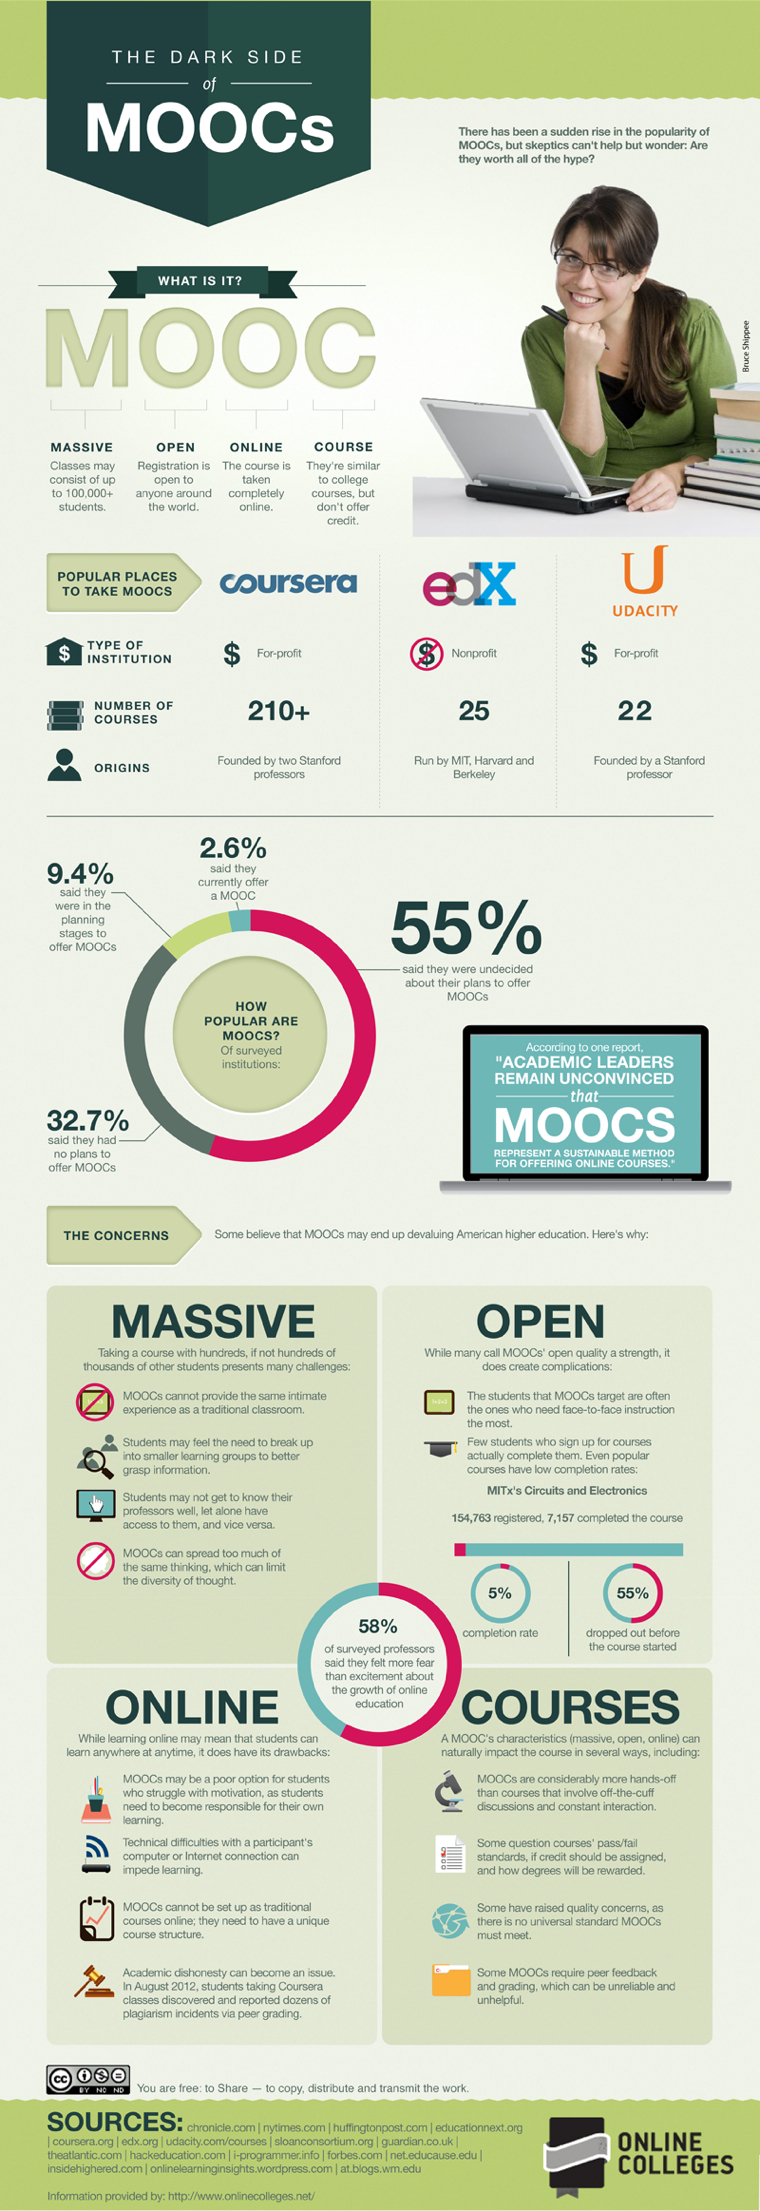 Pros and Cons of MOOCs